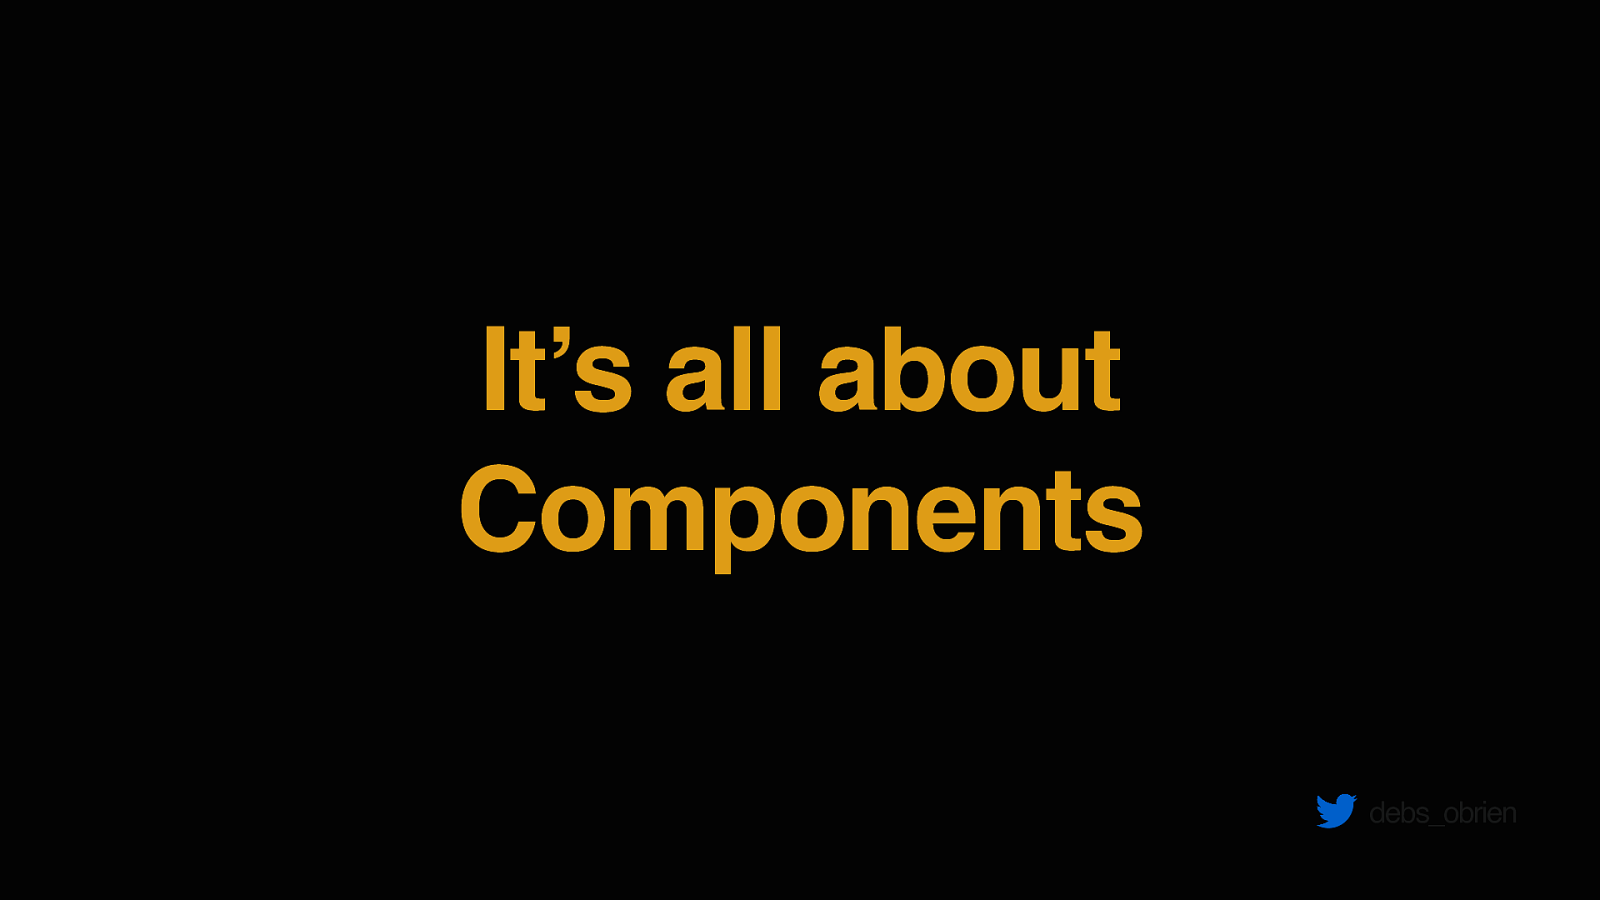 It’s all about Components